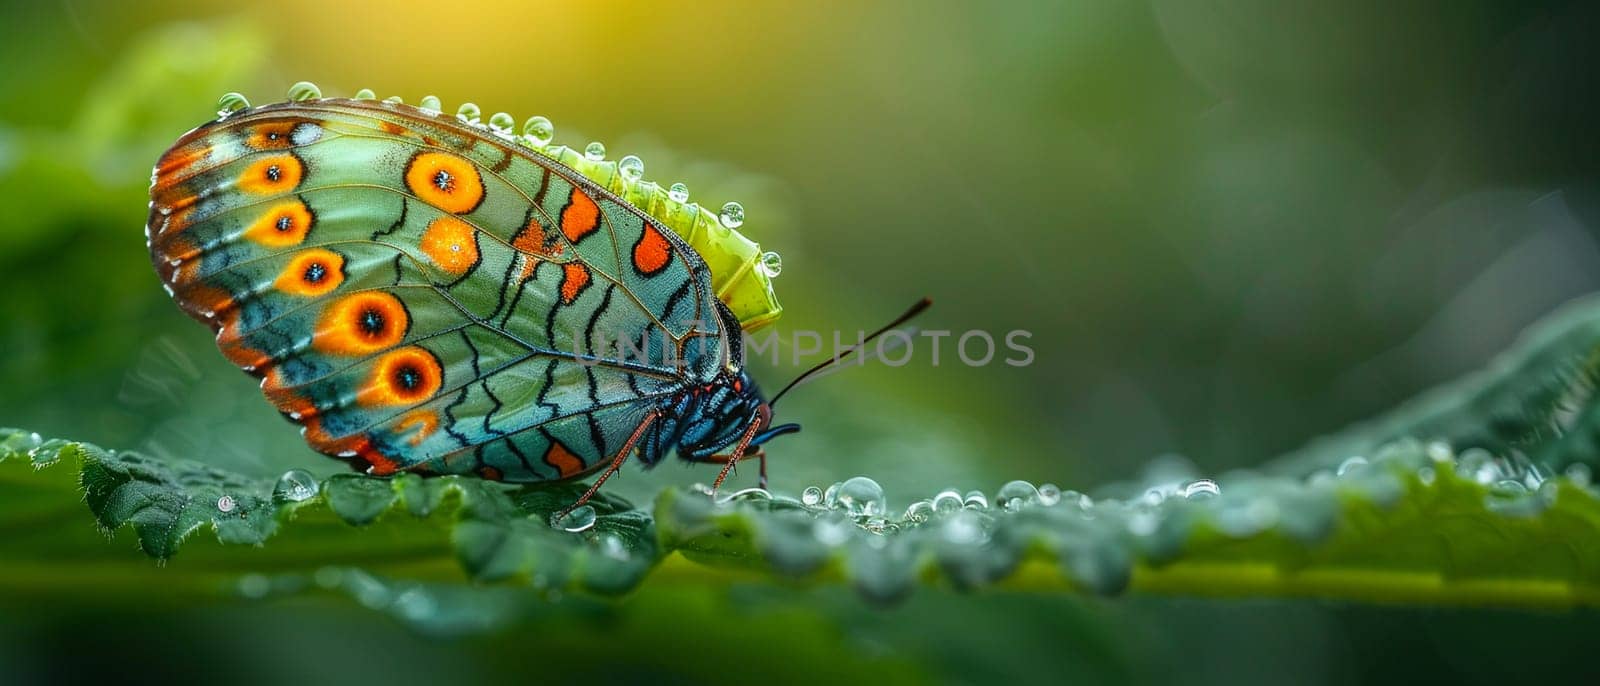 Macro shot of a butterfly emerging from a chrysalis, representing transformation and renewal